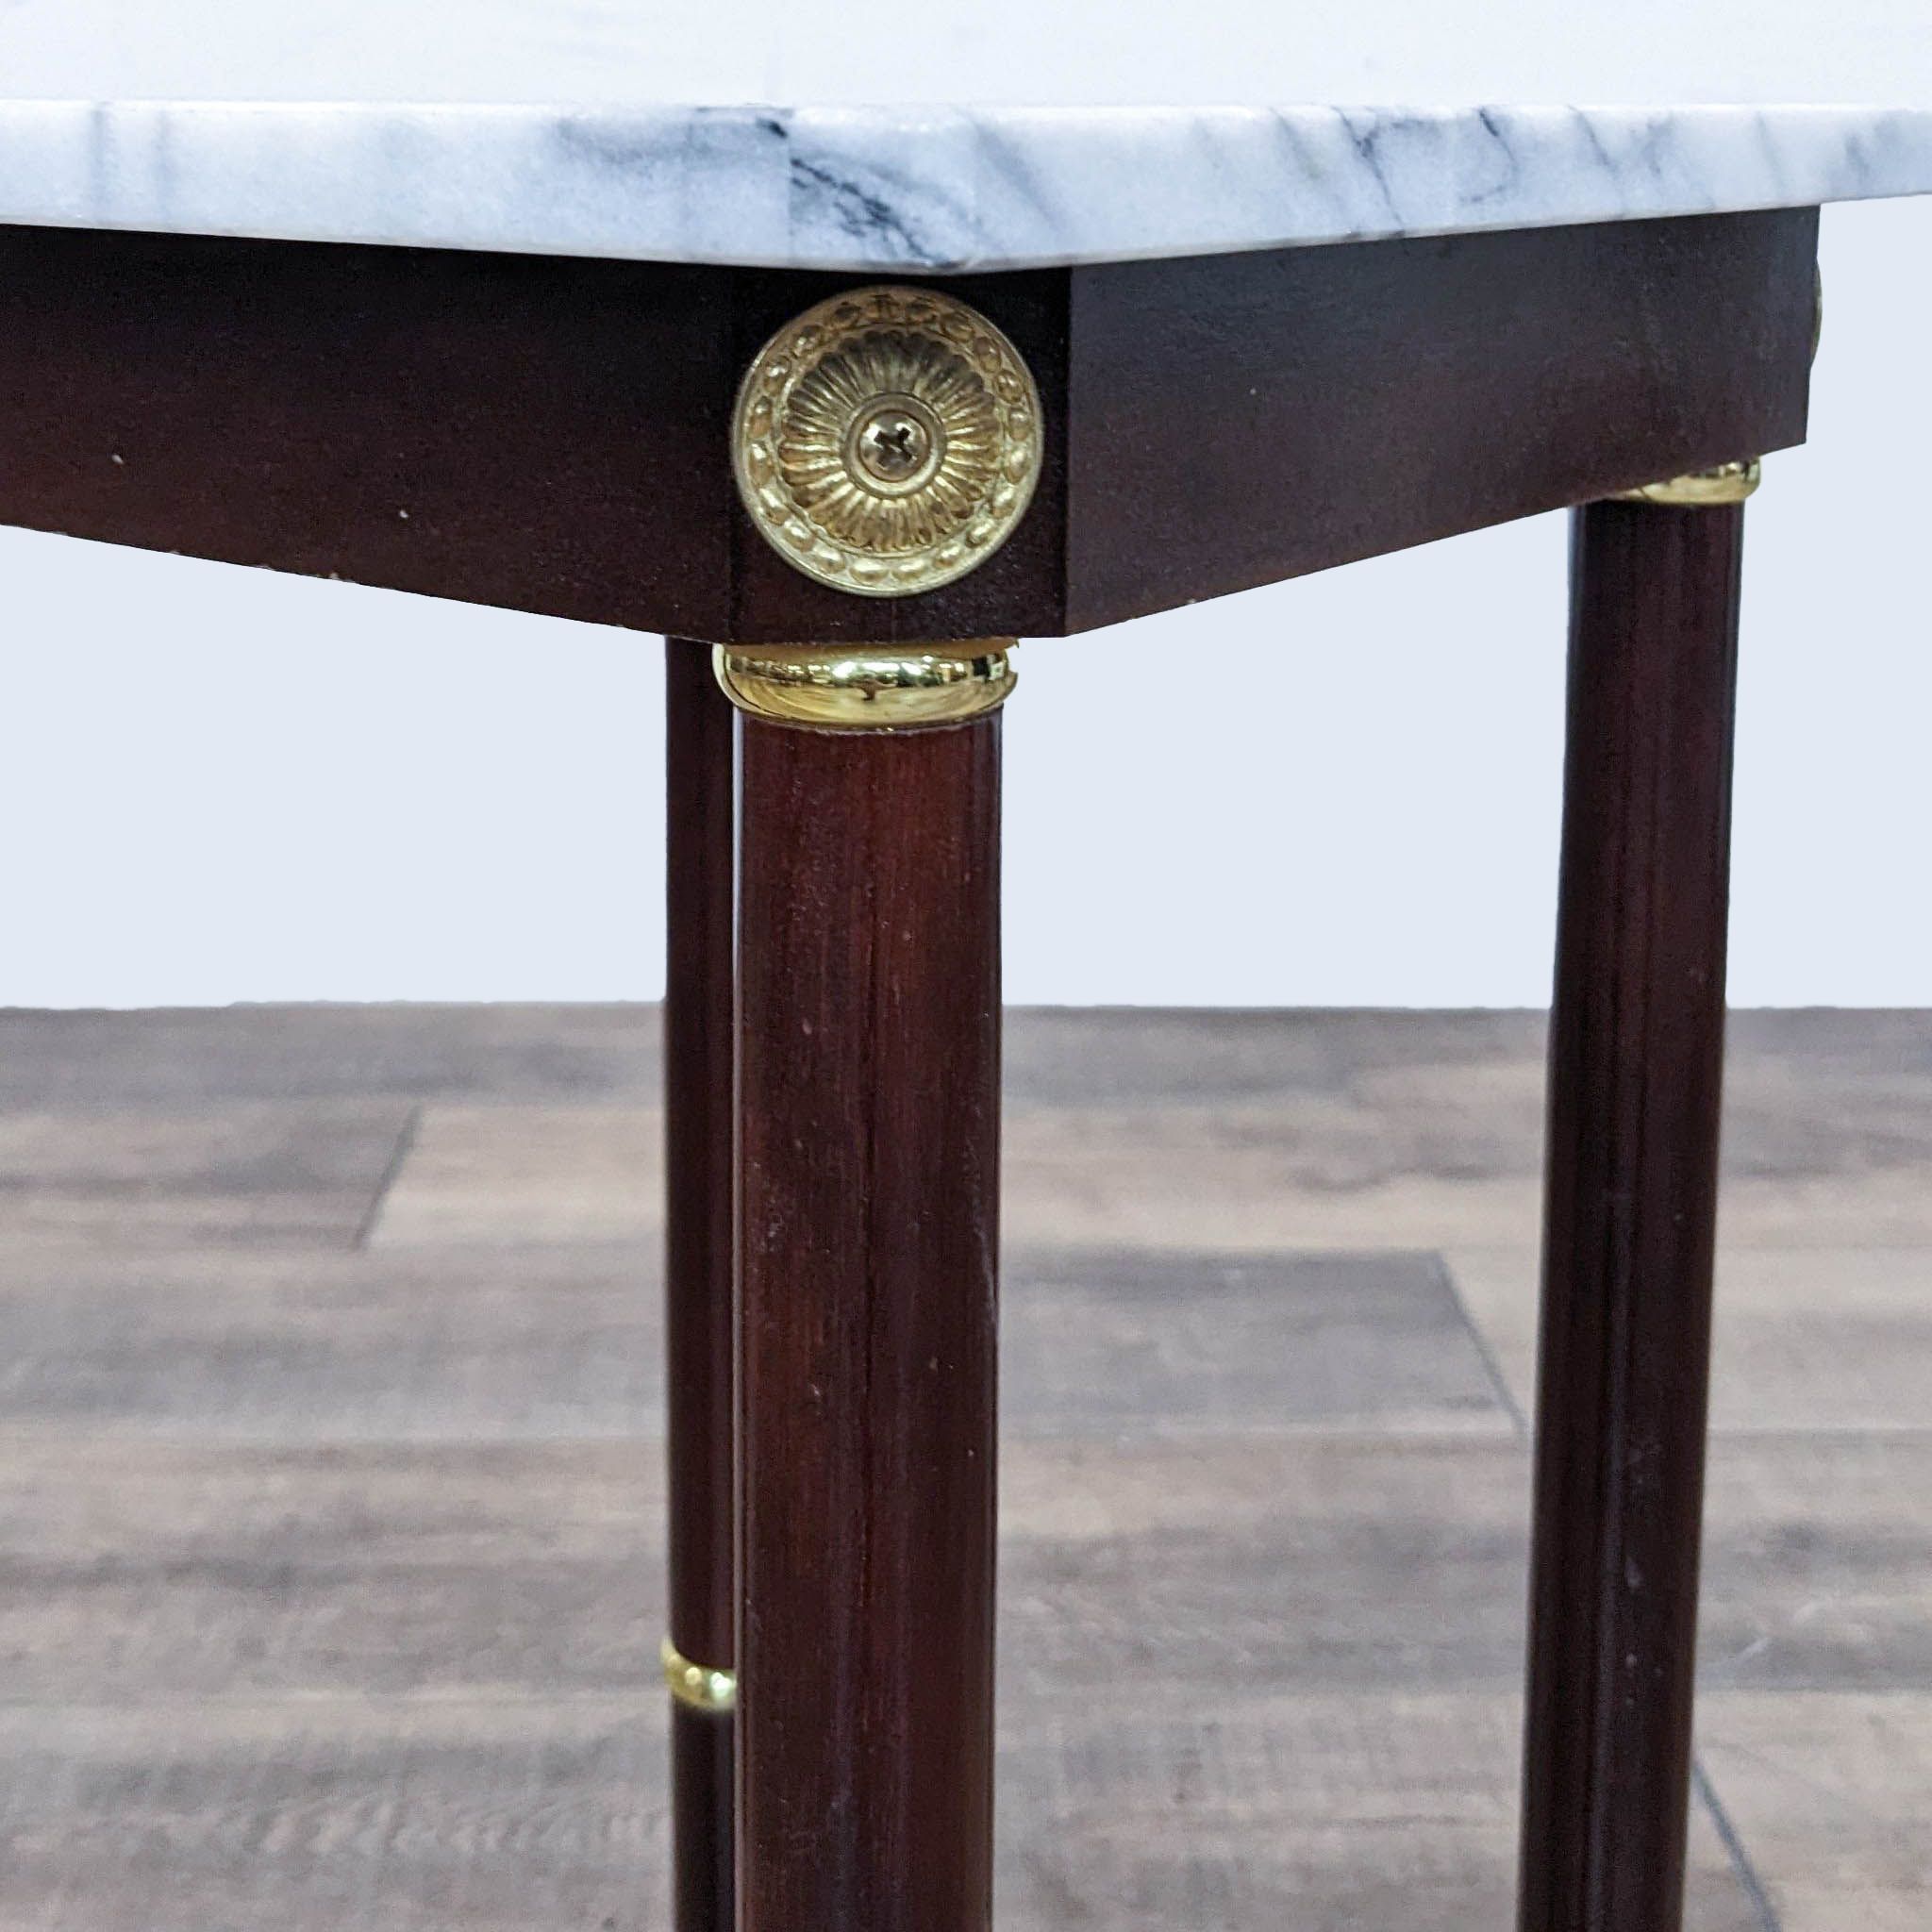 Close-up of Reperch wooden end table leg with brass rings and ornate brass cap, against a marble top.